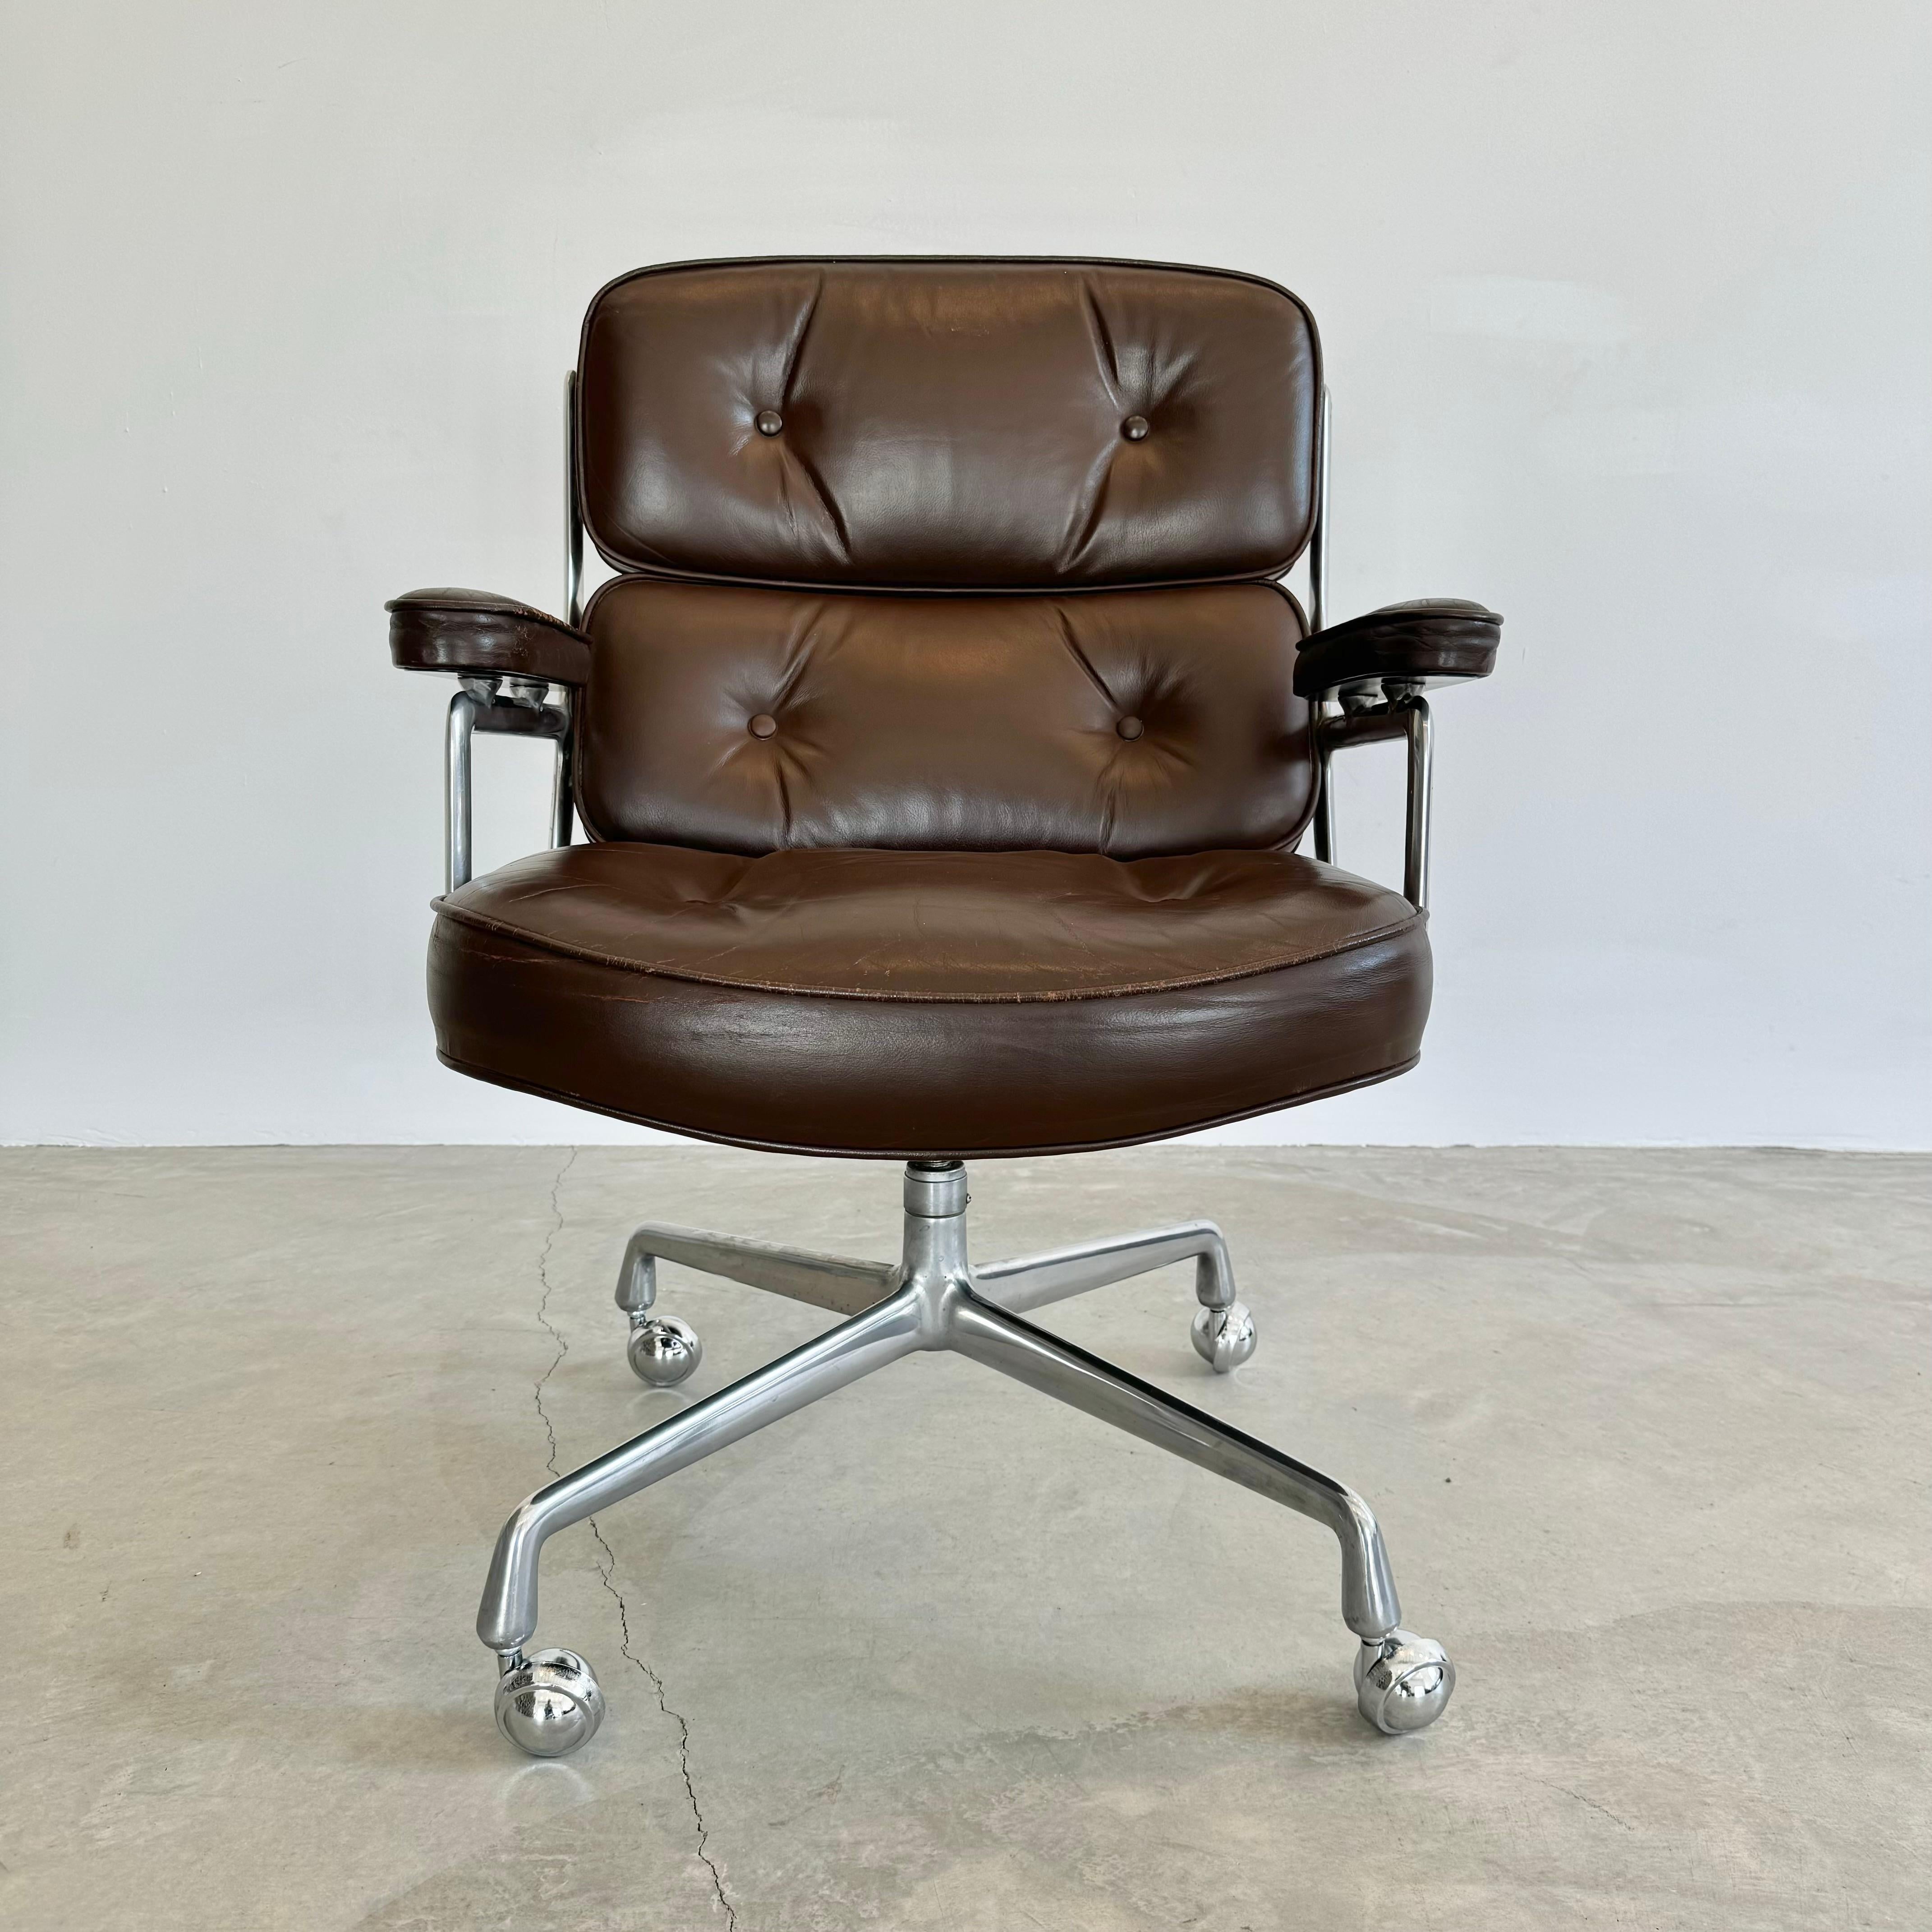 Mid-Century Modern Eames Time Life Chair in Chocolate Leather for Herman Miller, 1978 USA For Sale